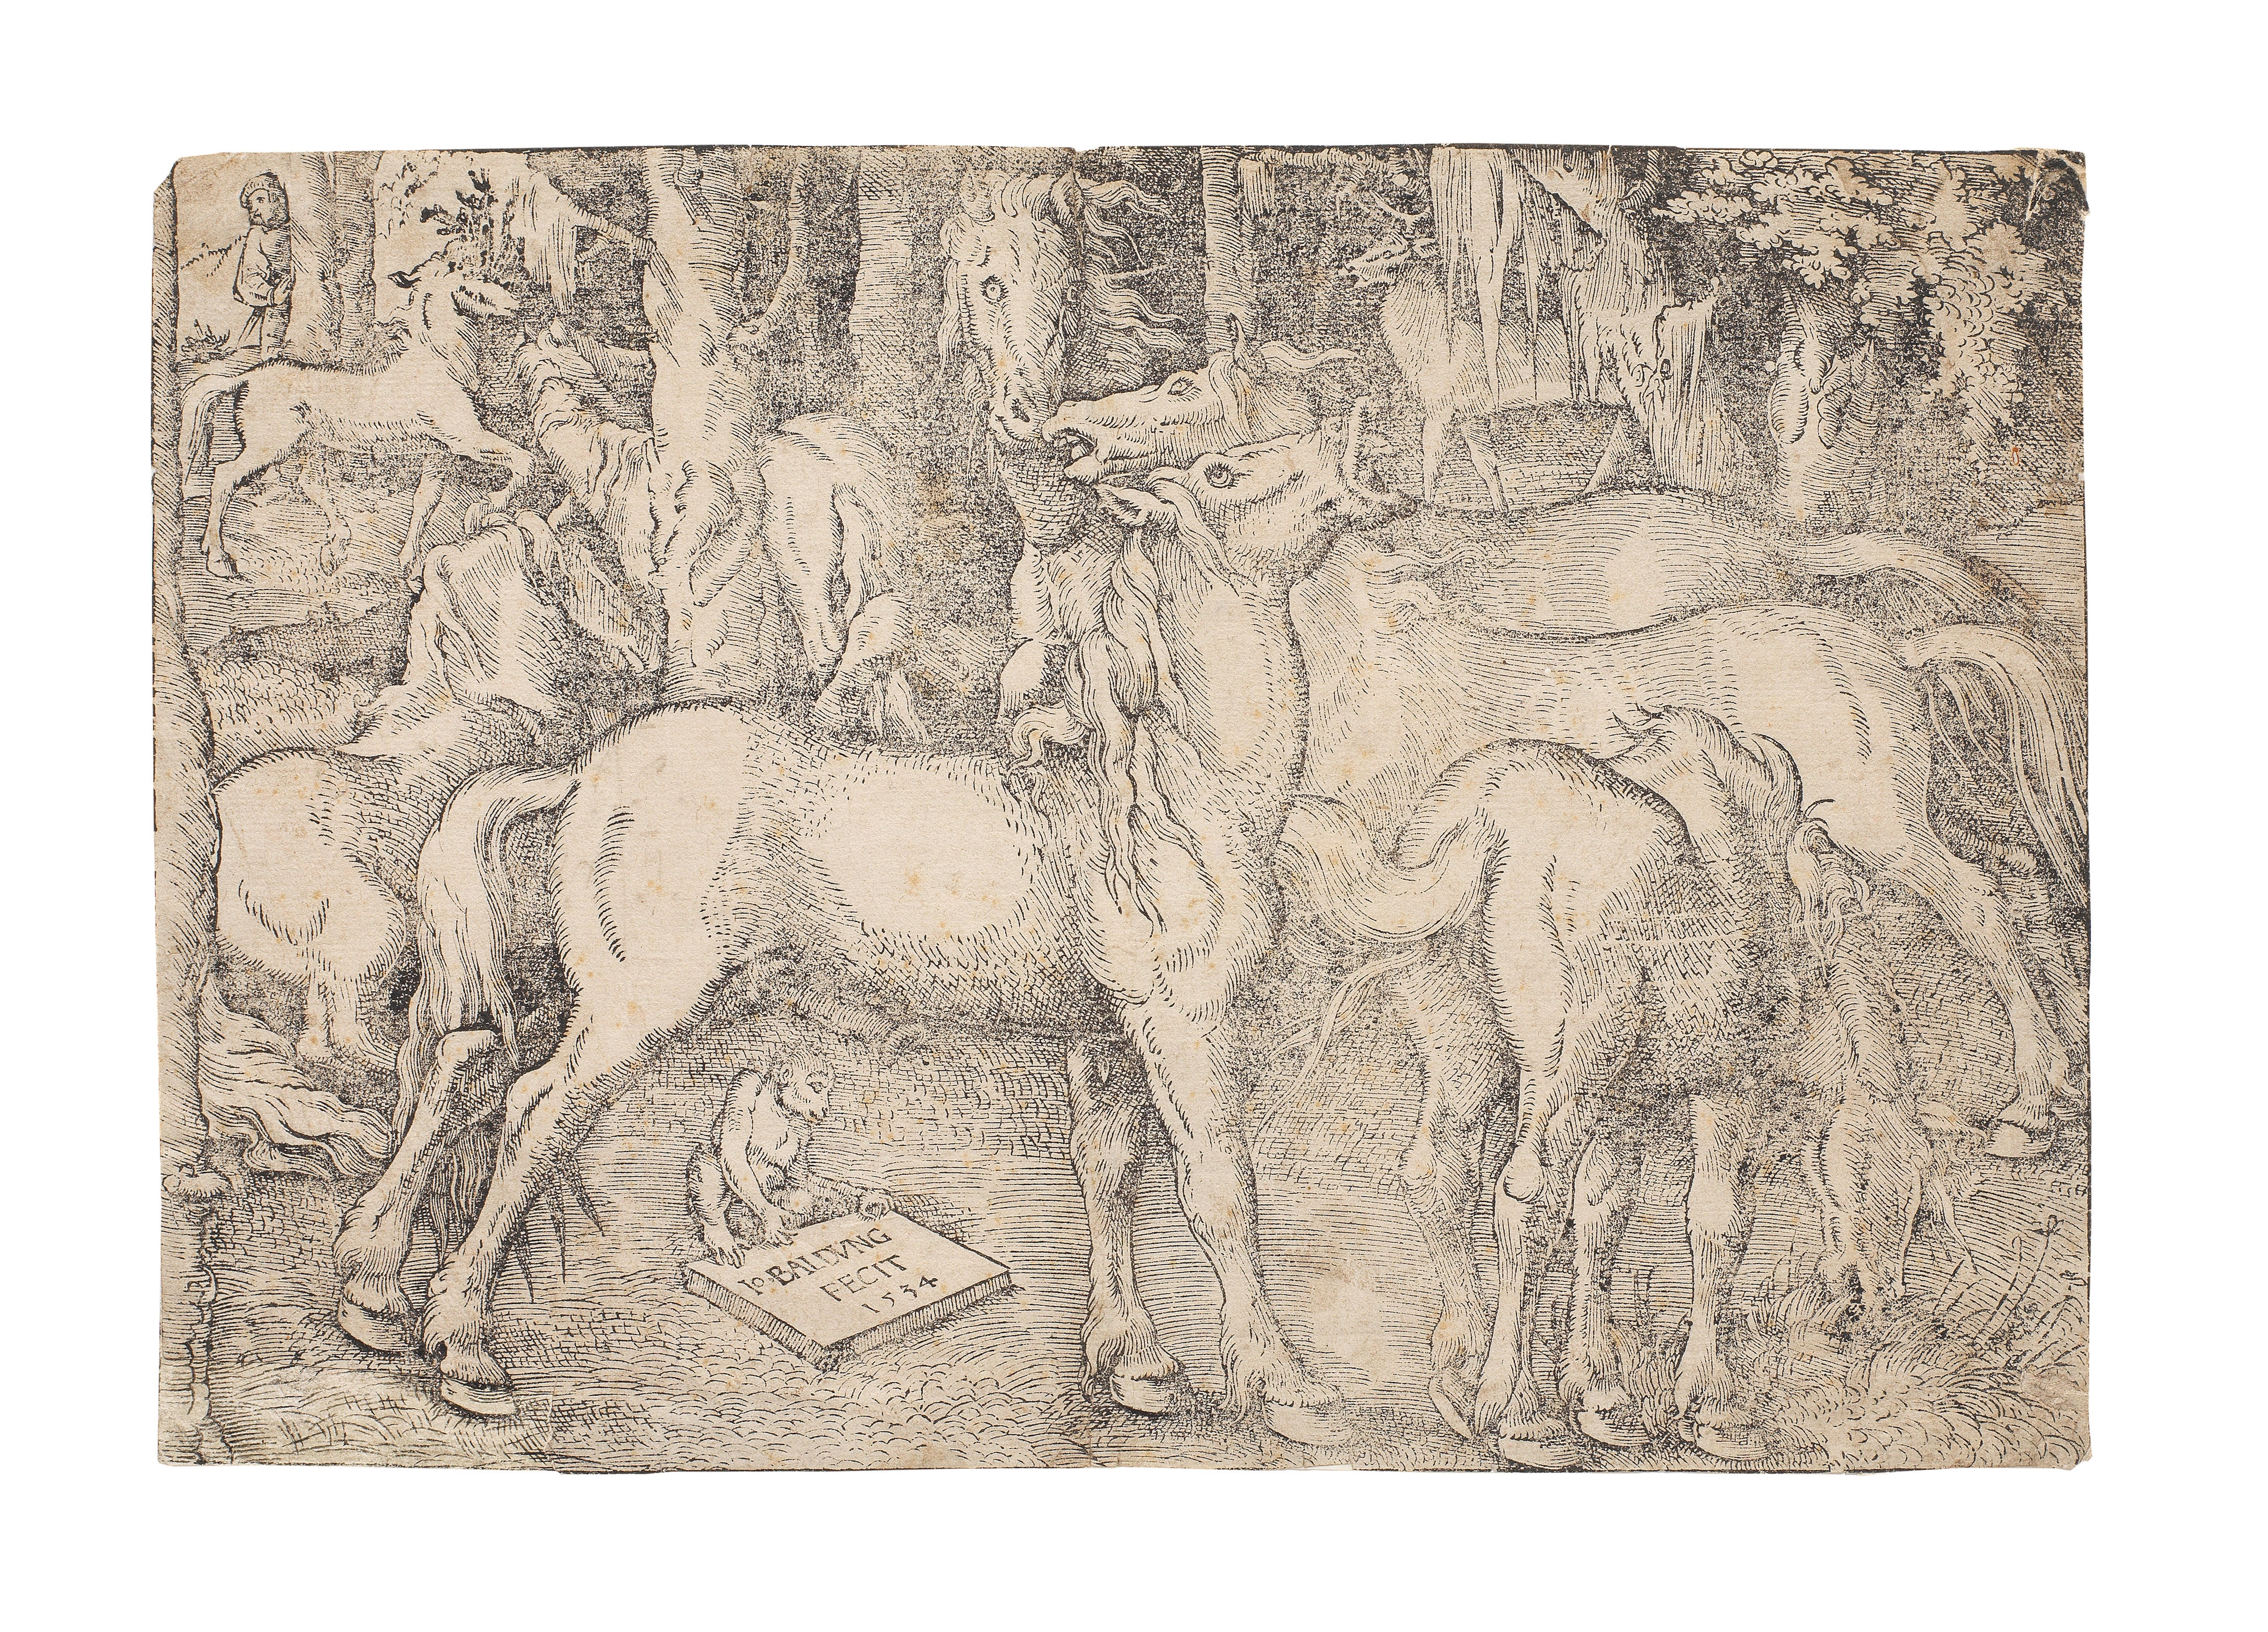 Group of Seven Wild Horses and a Monkey by Hans Baldung Grien, 1534